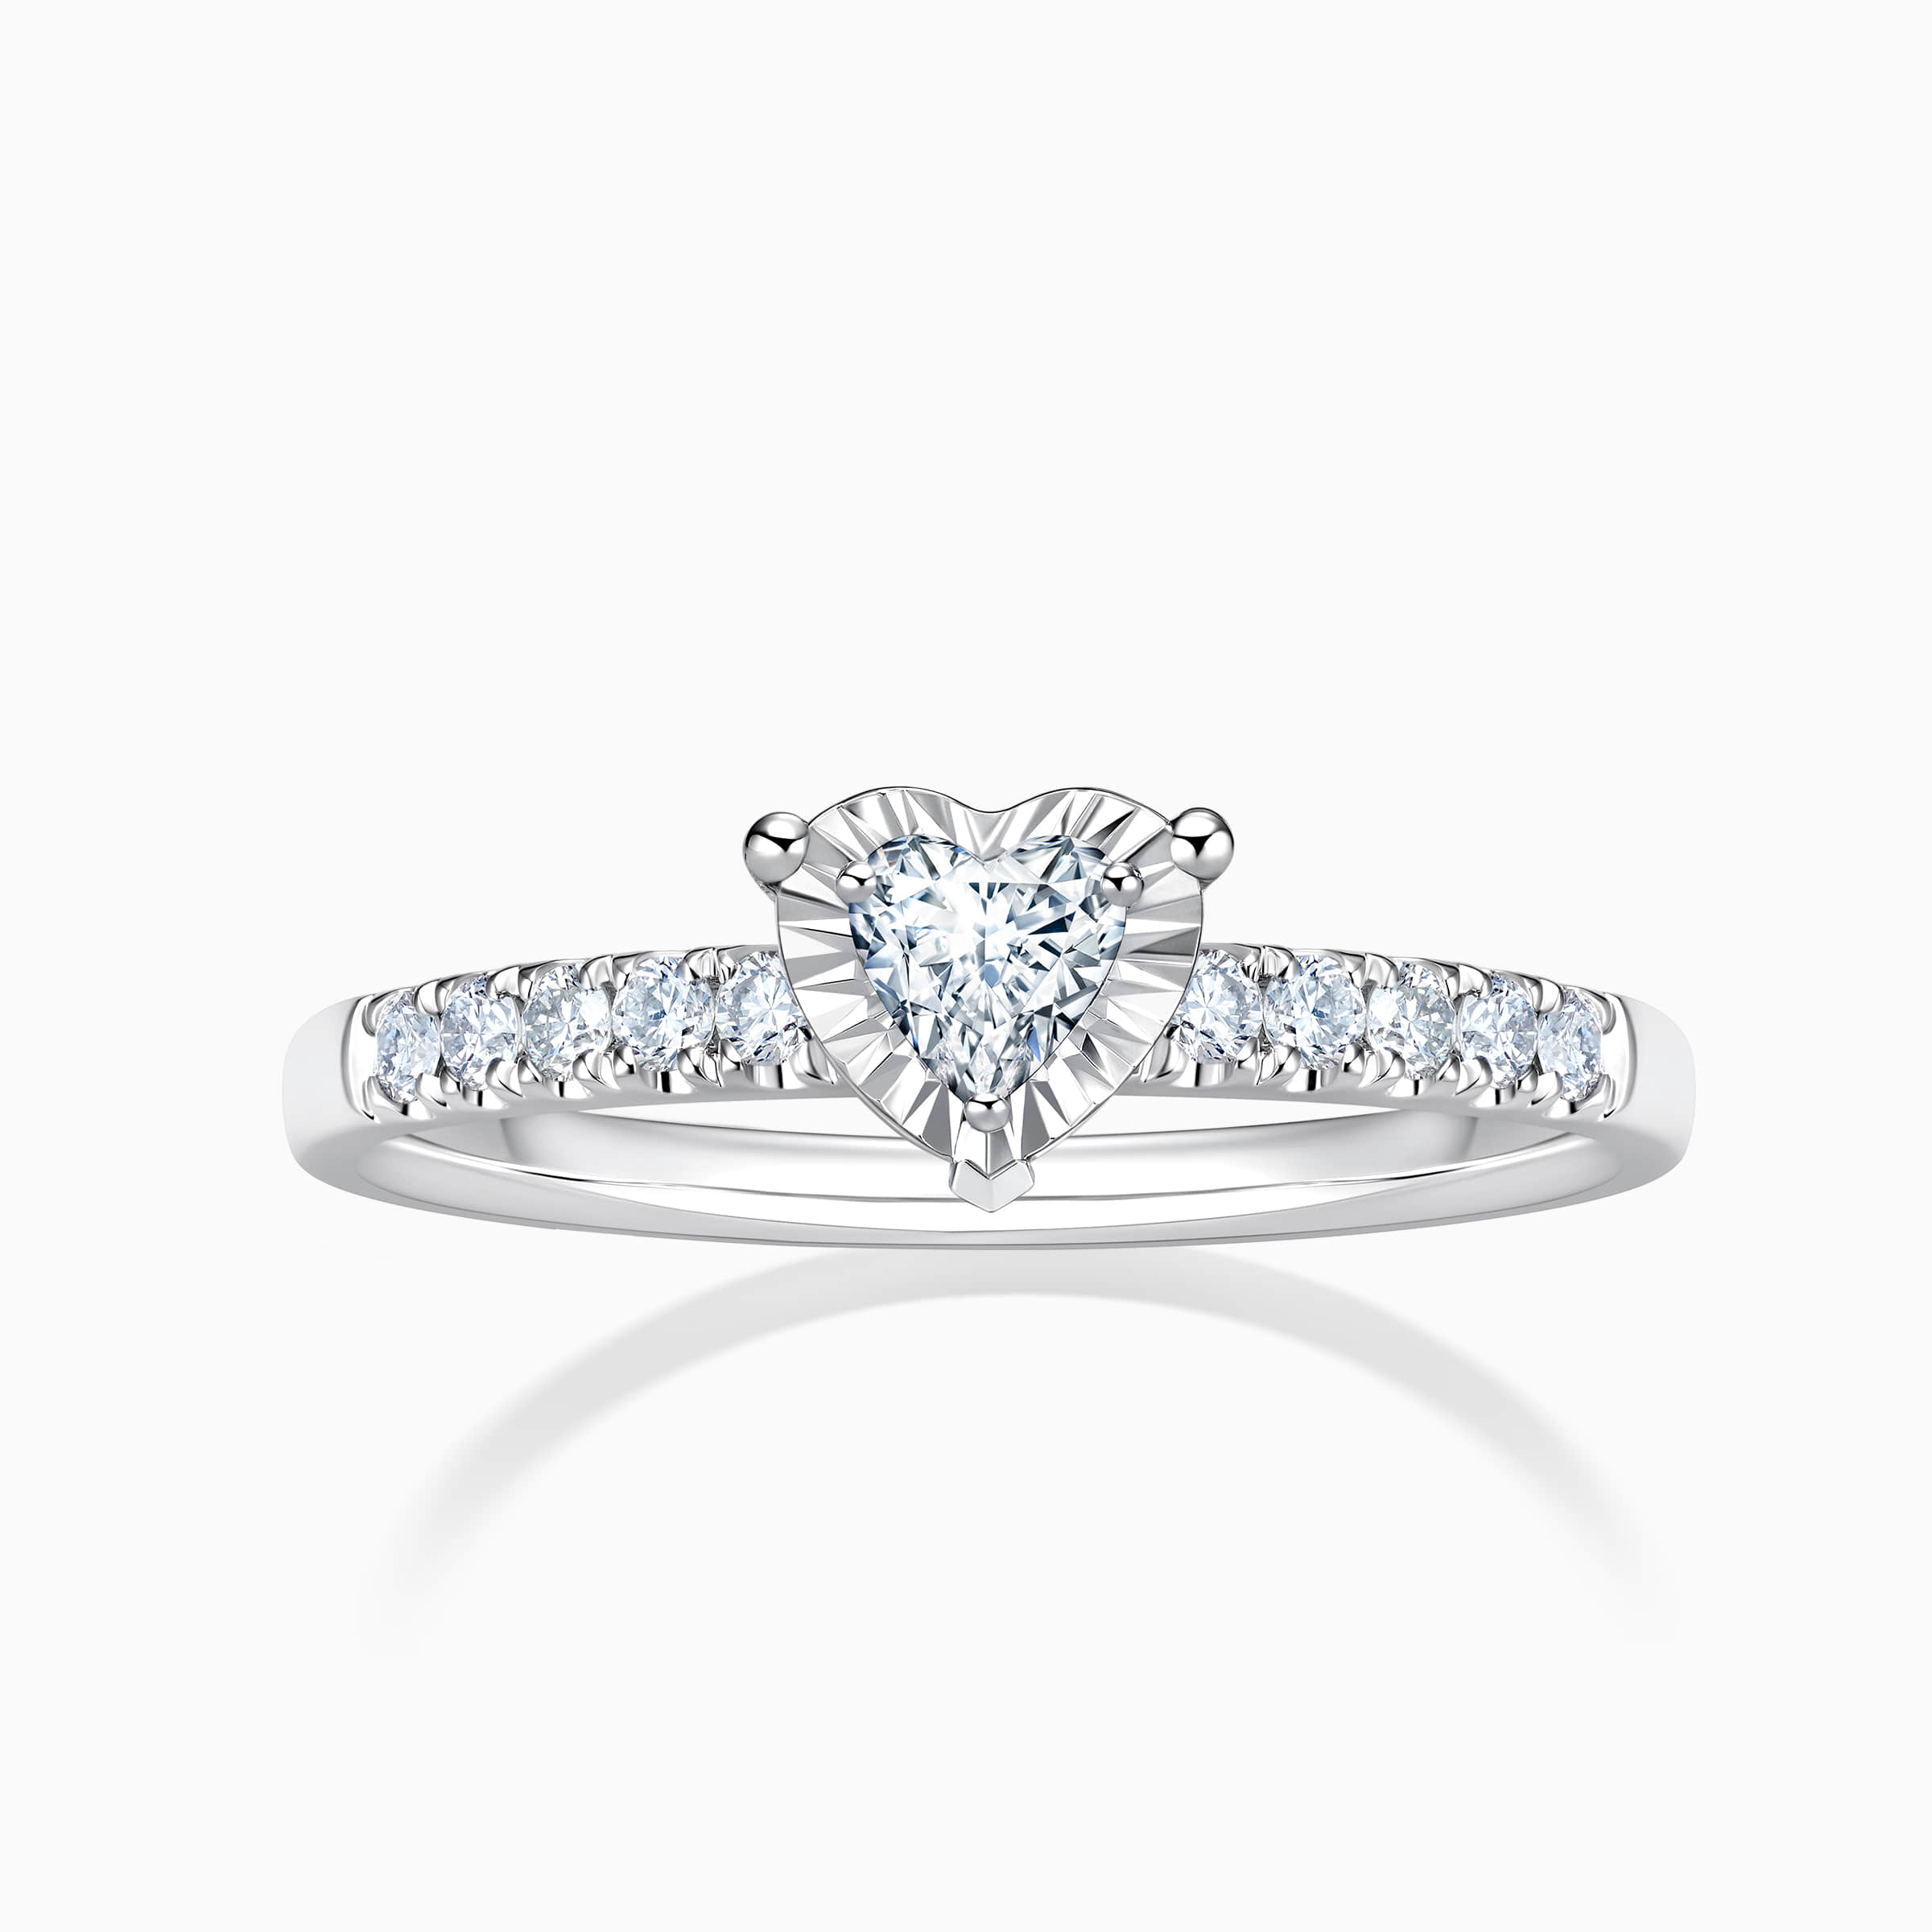 Darry Ring heart shaped diamond engagement ring white gold